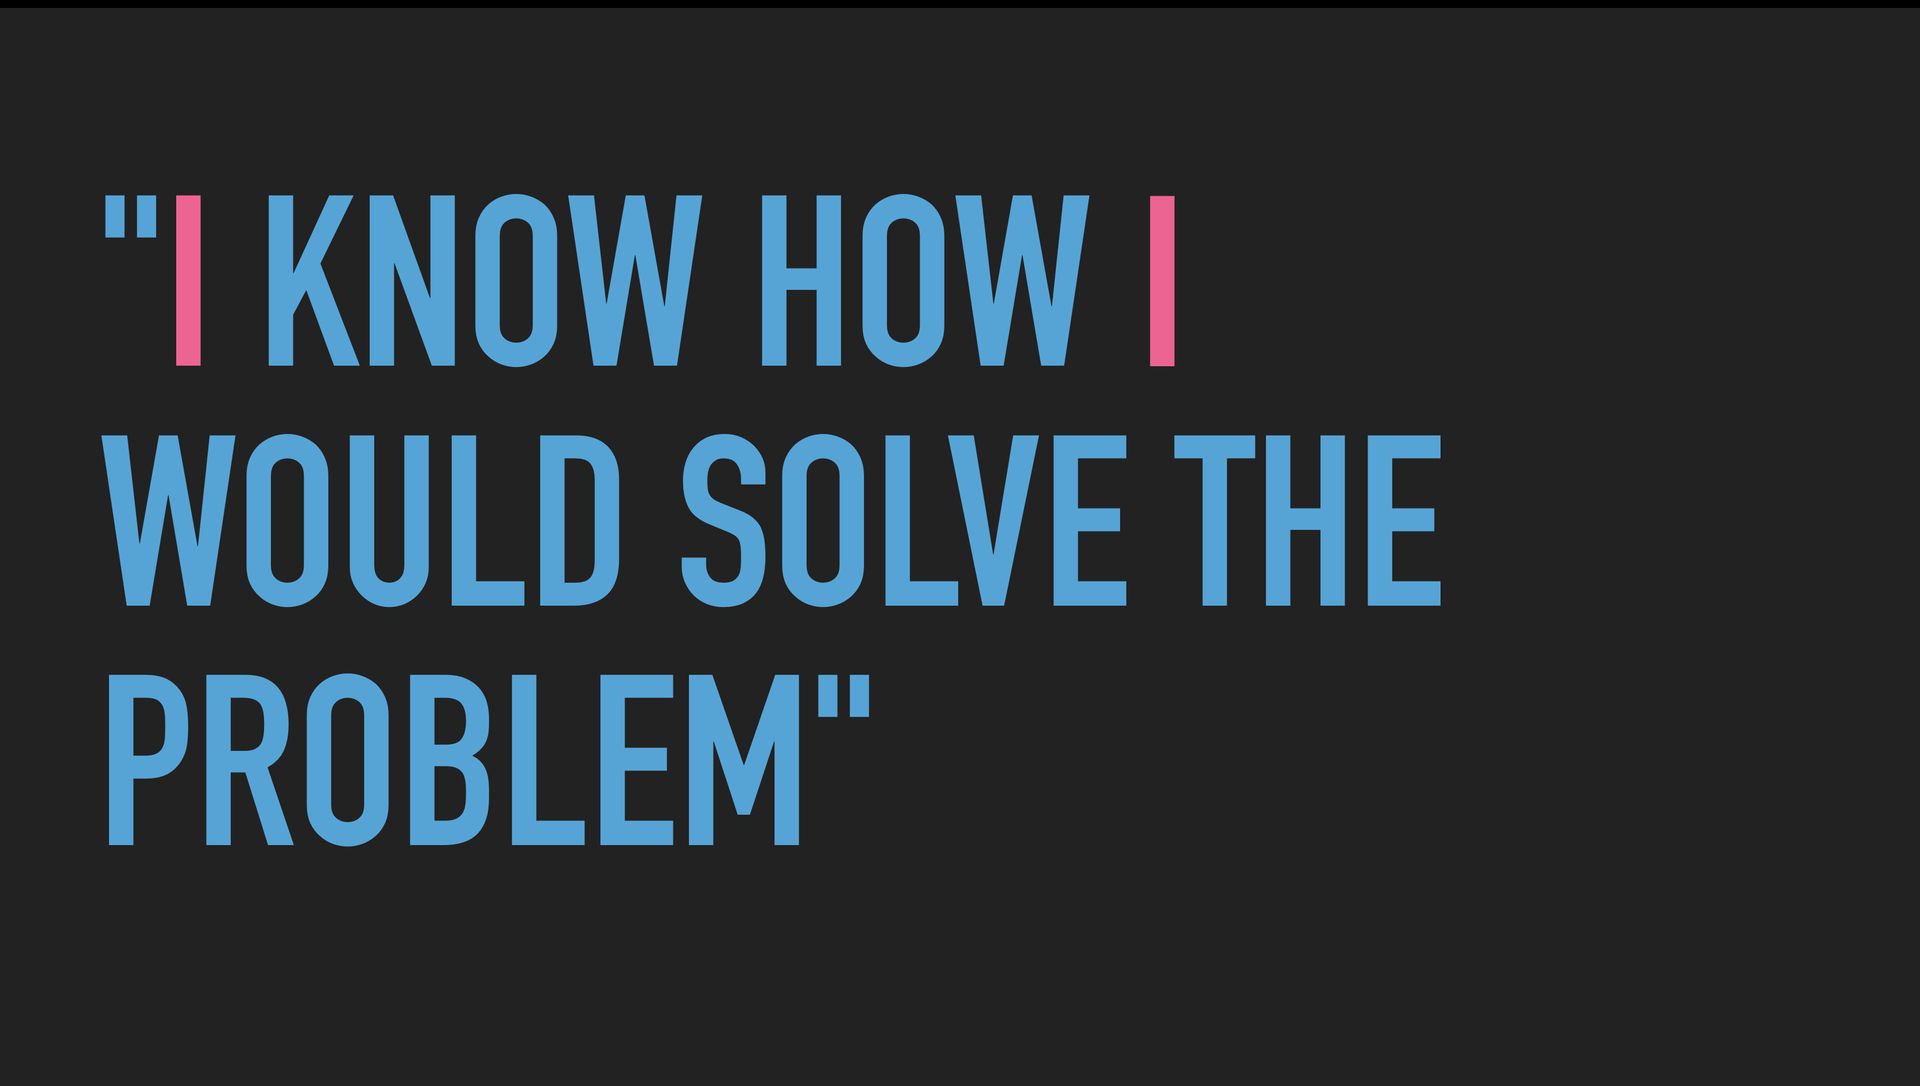 Slide text: “I know how I would solve the problem”